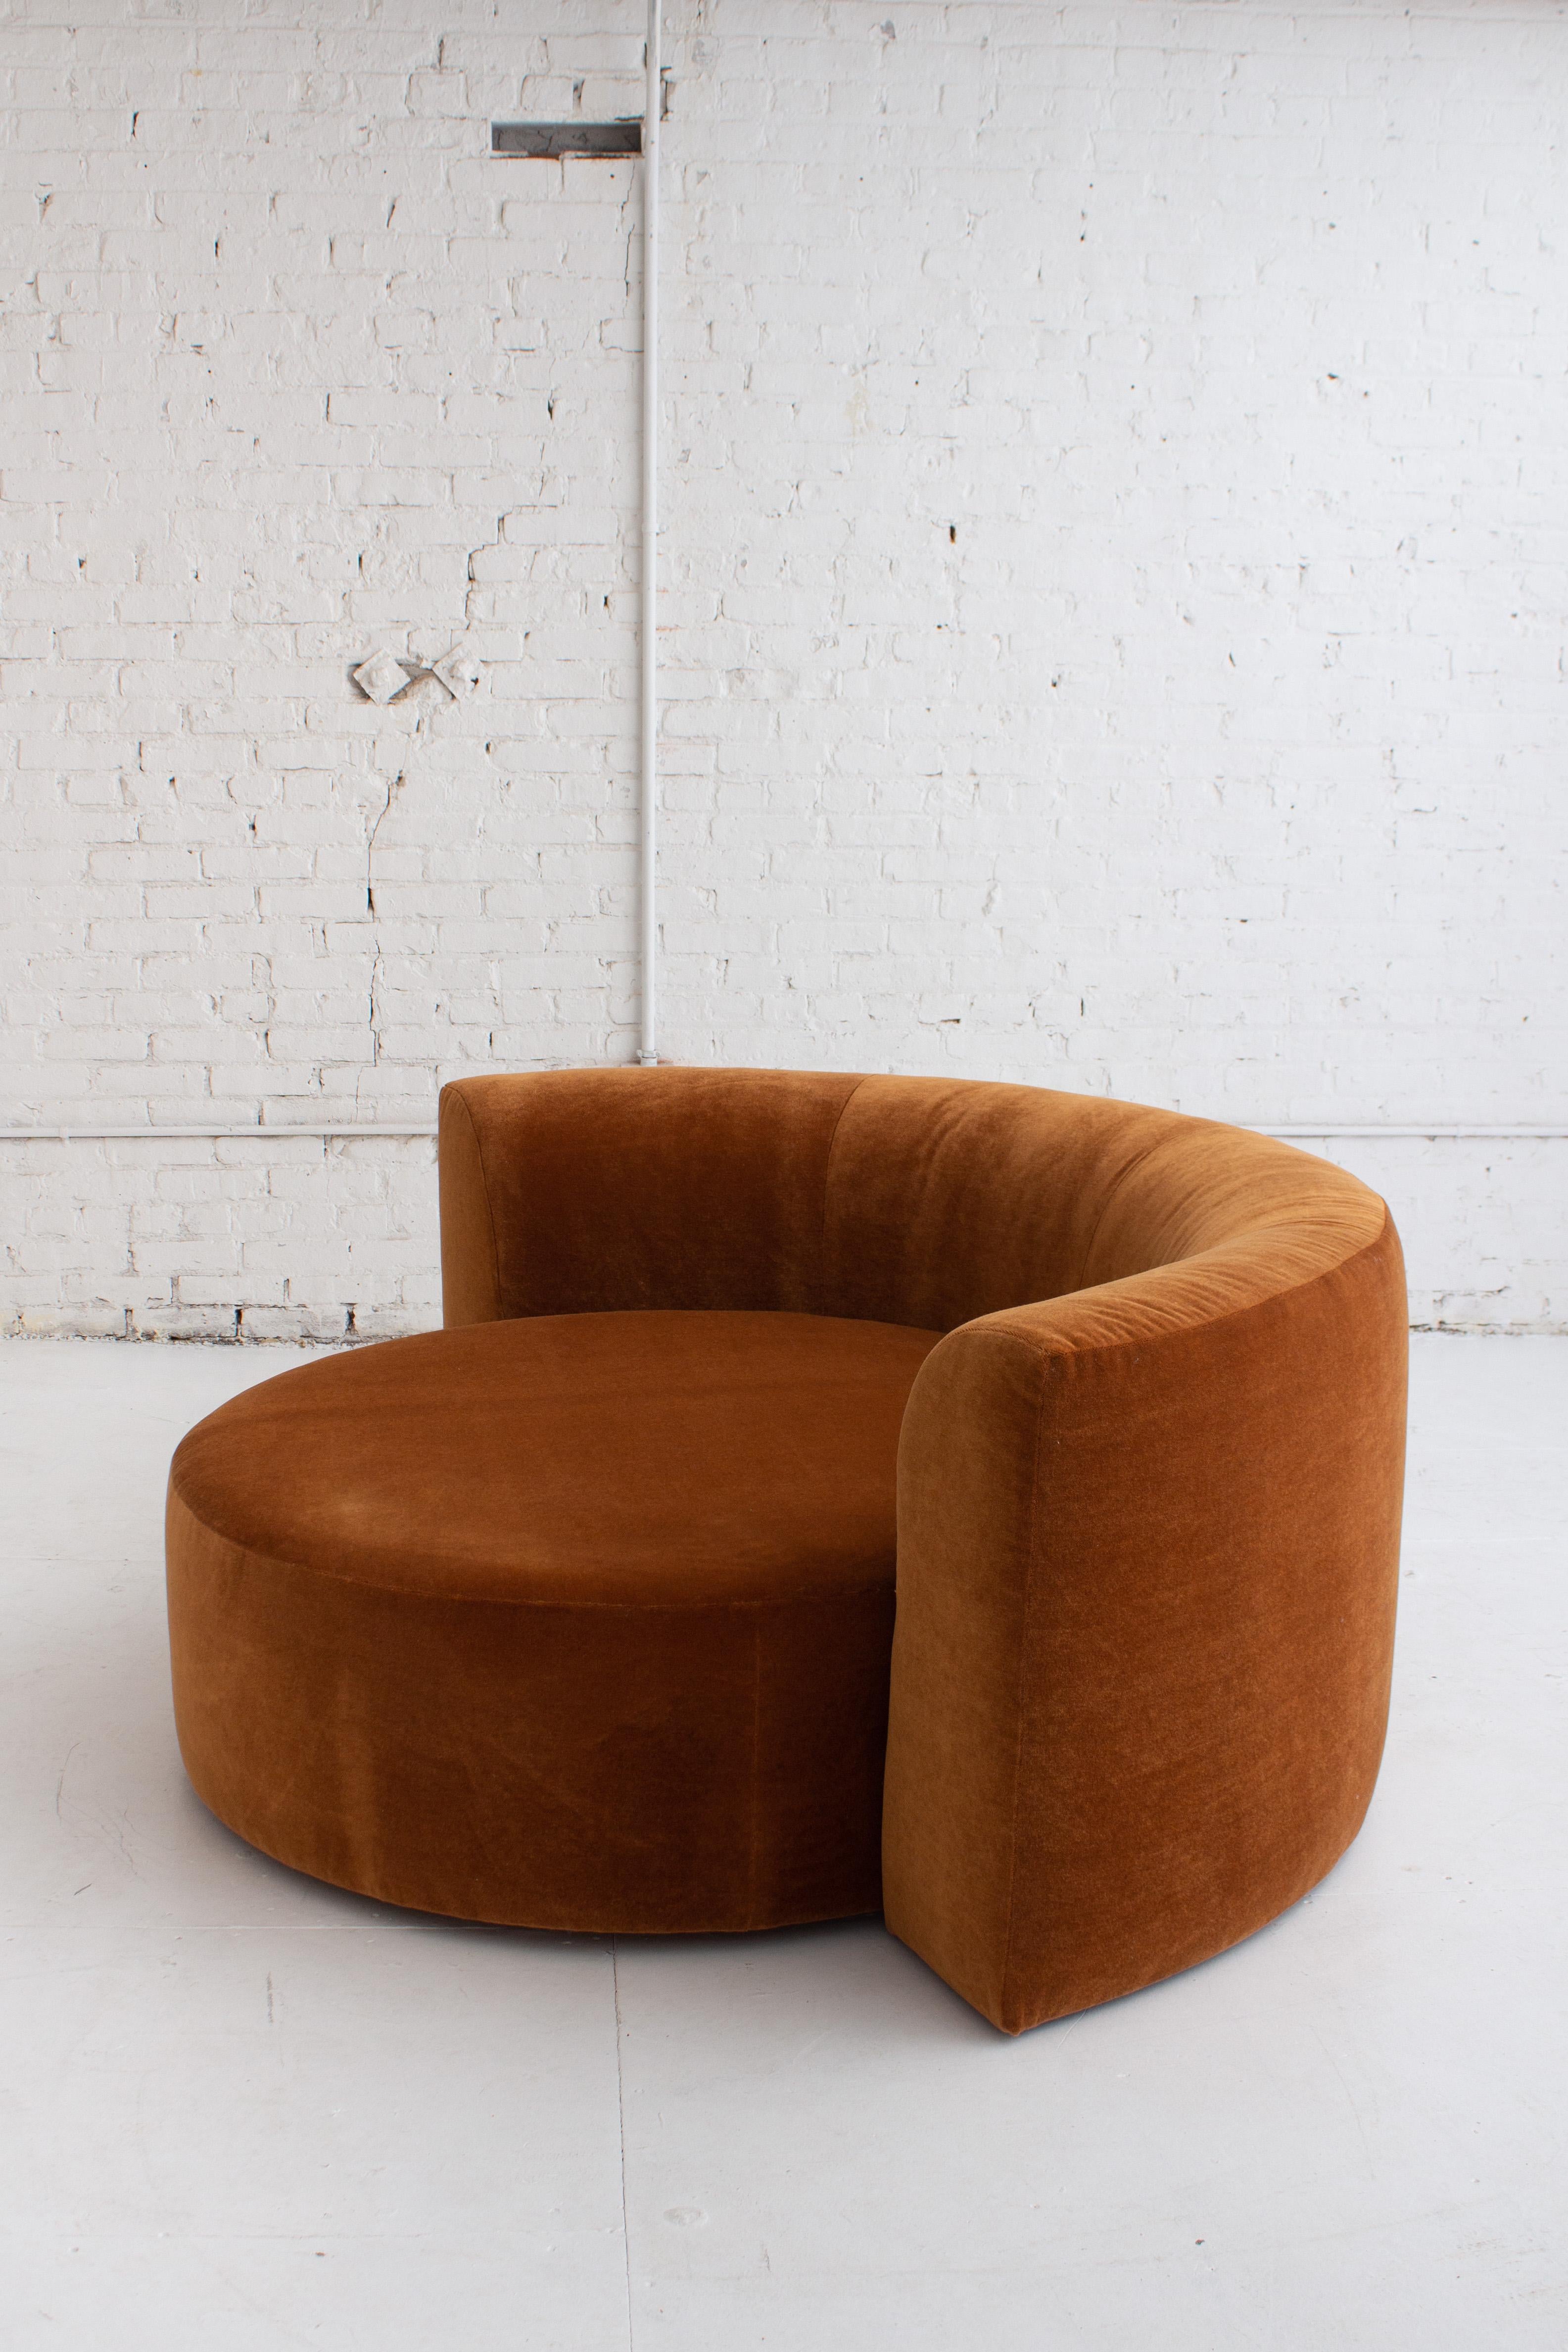 Circular Chaise Lounge in Mohair by Roger Rougier For Sale 5